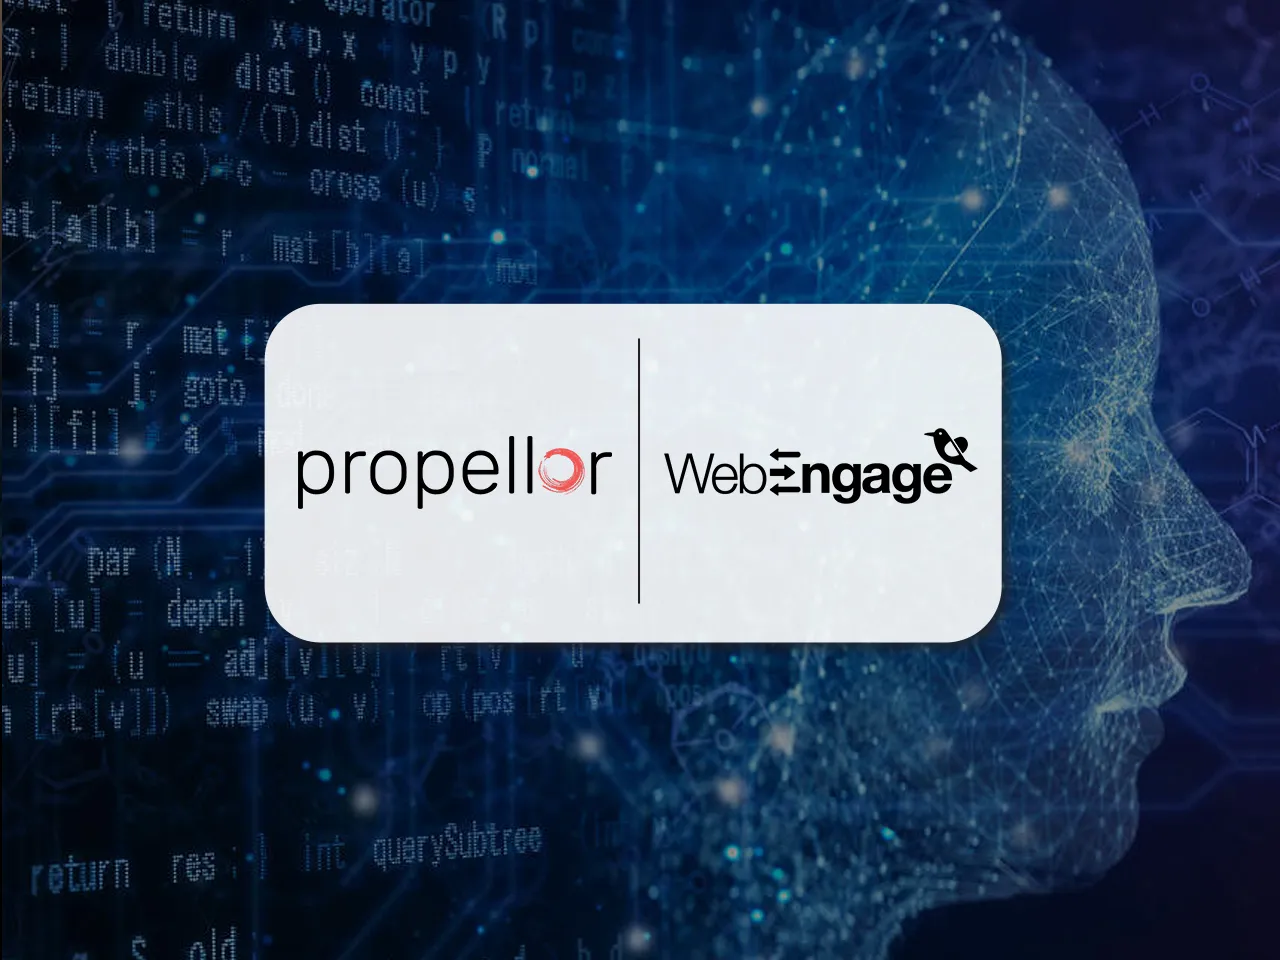 WebEngage acqui-hires data scientists from Propellor.ai to strengthen AI capabilities